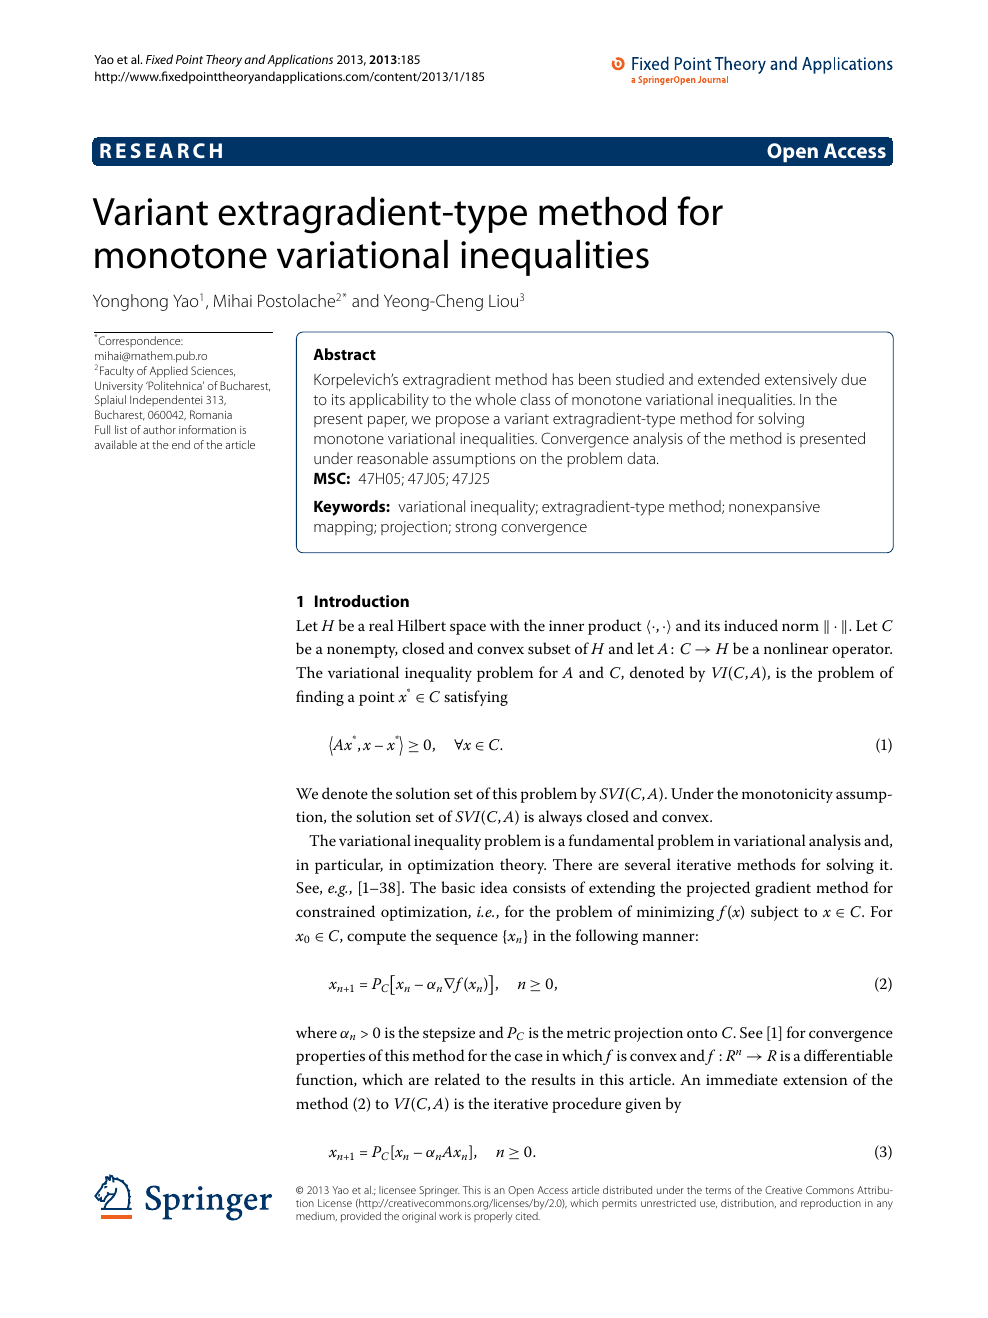 Variant Extragradient Type Method For Monotone Variational Inequalities Topic Of Research Paper In Mathematics Download Scholarly Article Pdf And Read For Free On Cyberleninka Open Science Hub